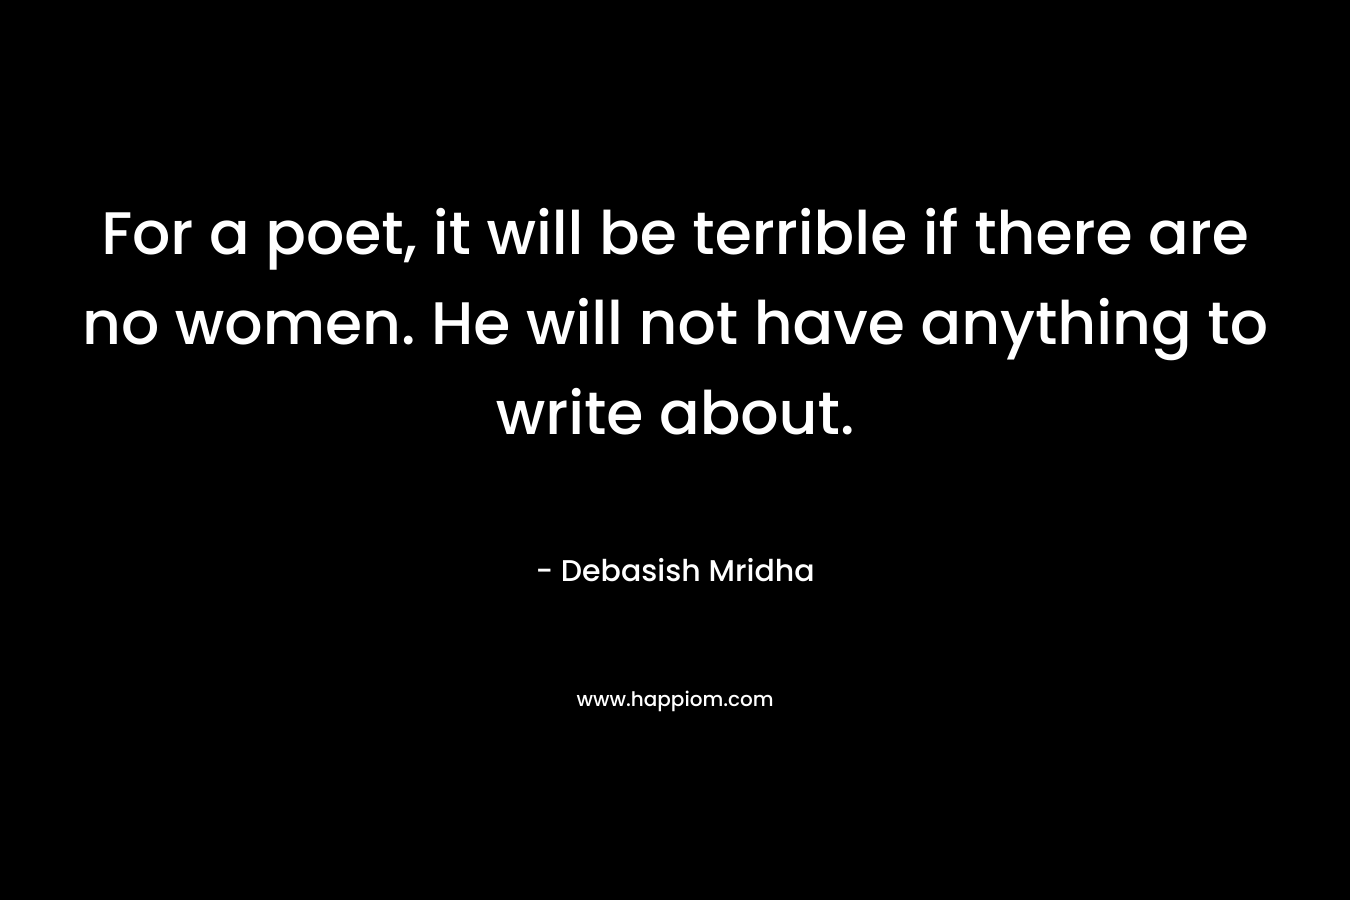 For a poet, it will be terrible if there are no women. He will not have anything to write about. – Debasish Mridha